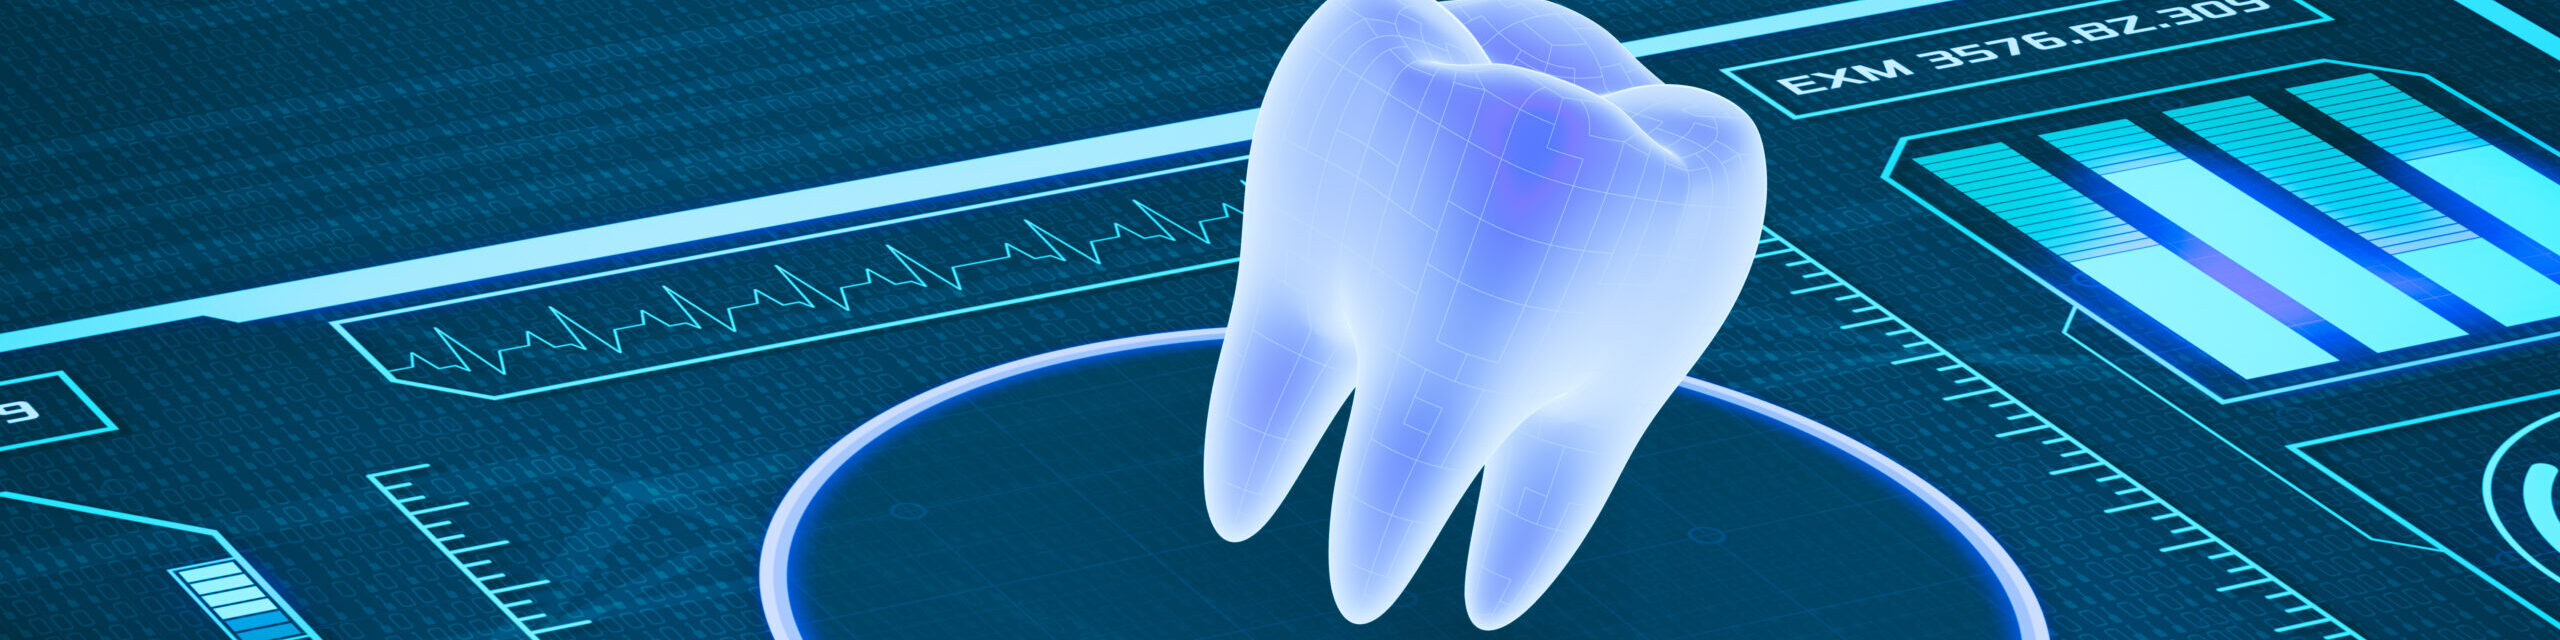 futuristic app interface for medical and scientific purpose - tooth scanner (3d render)